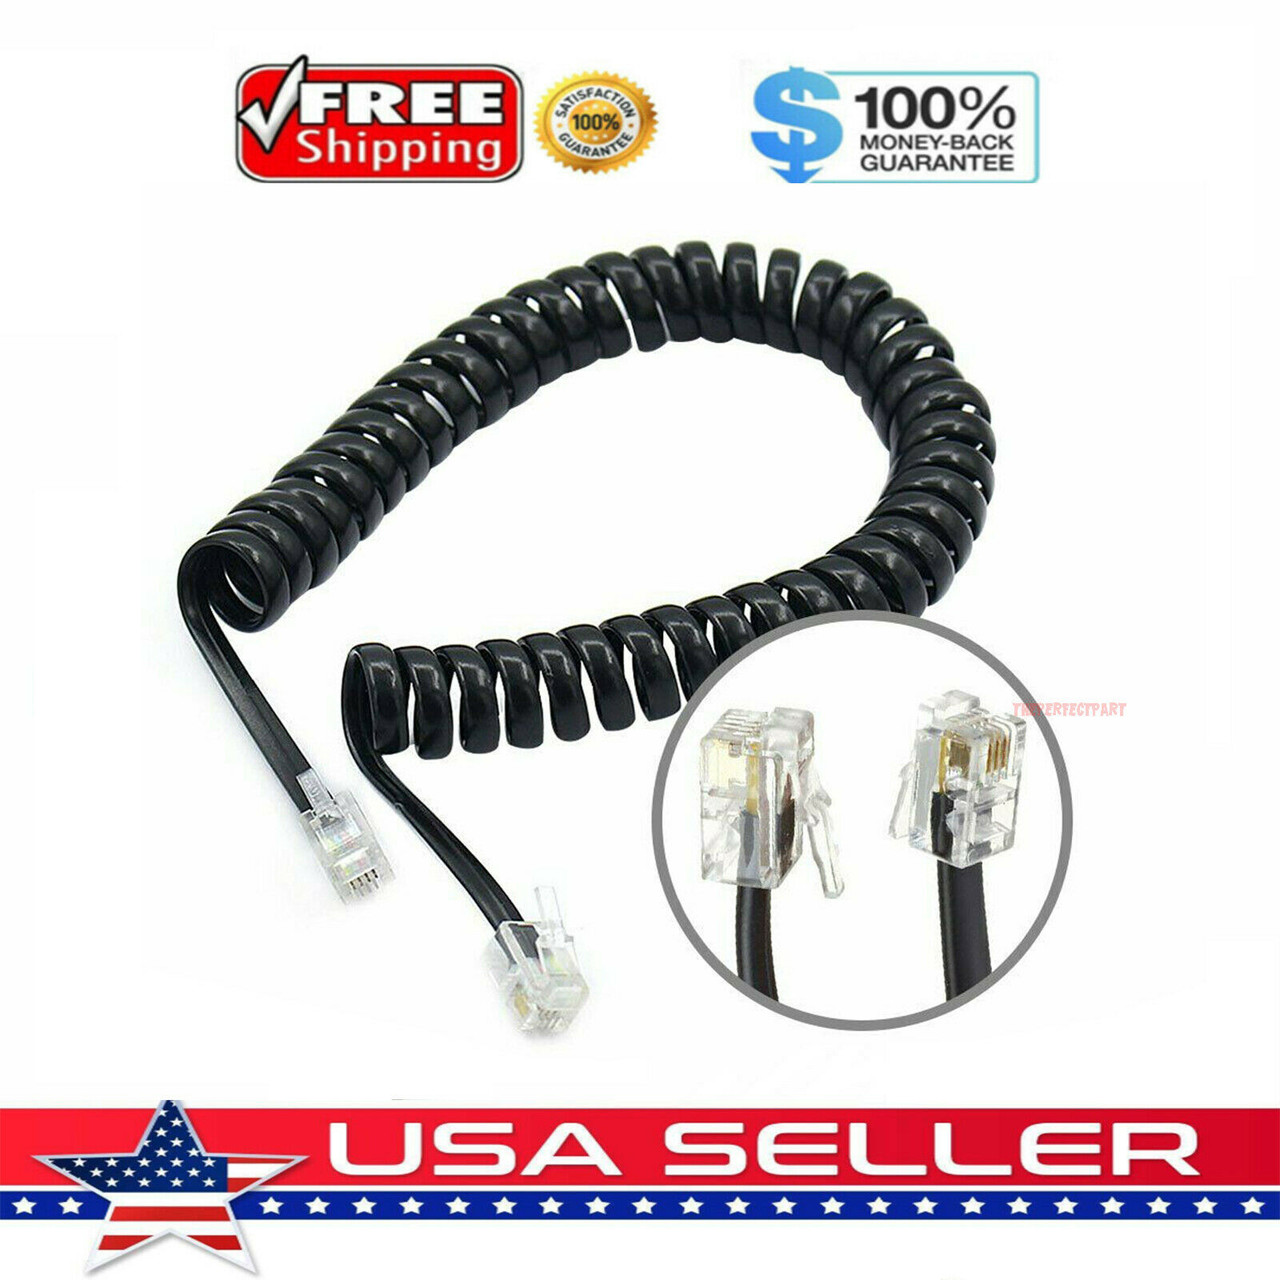 7FT Telephone Handset Receiver Cord Phone Curly Coil Cable 4P4C RJ22 - Black